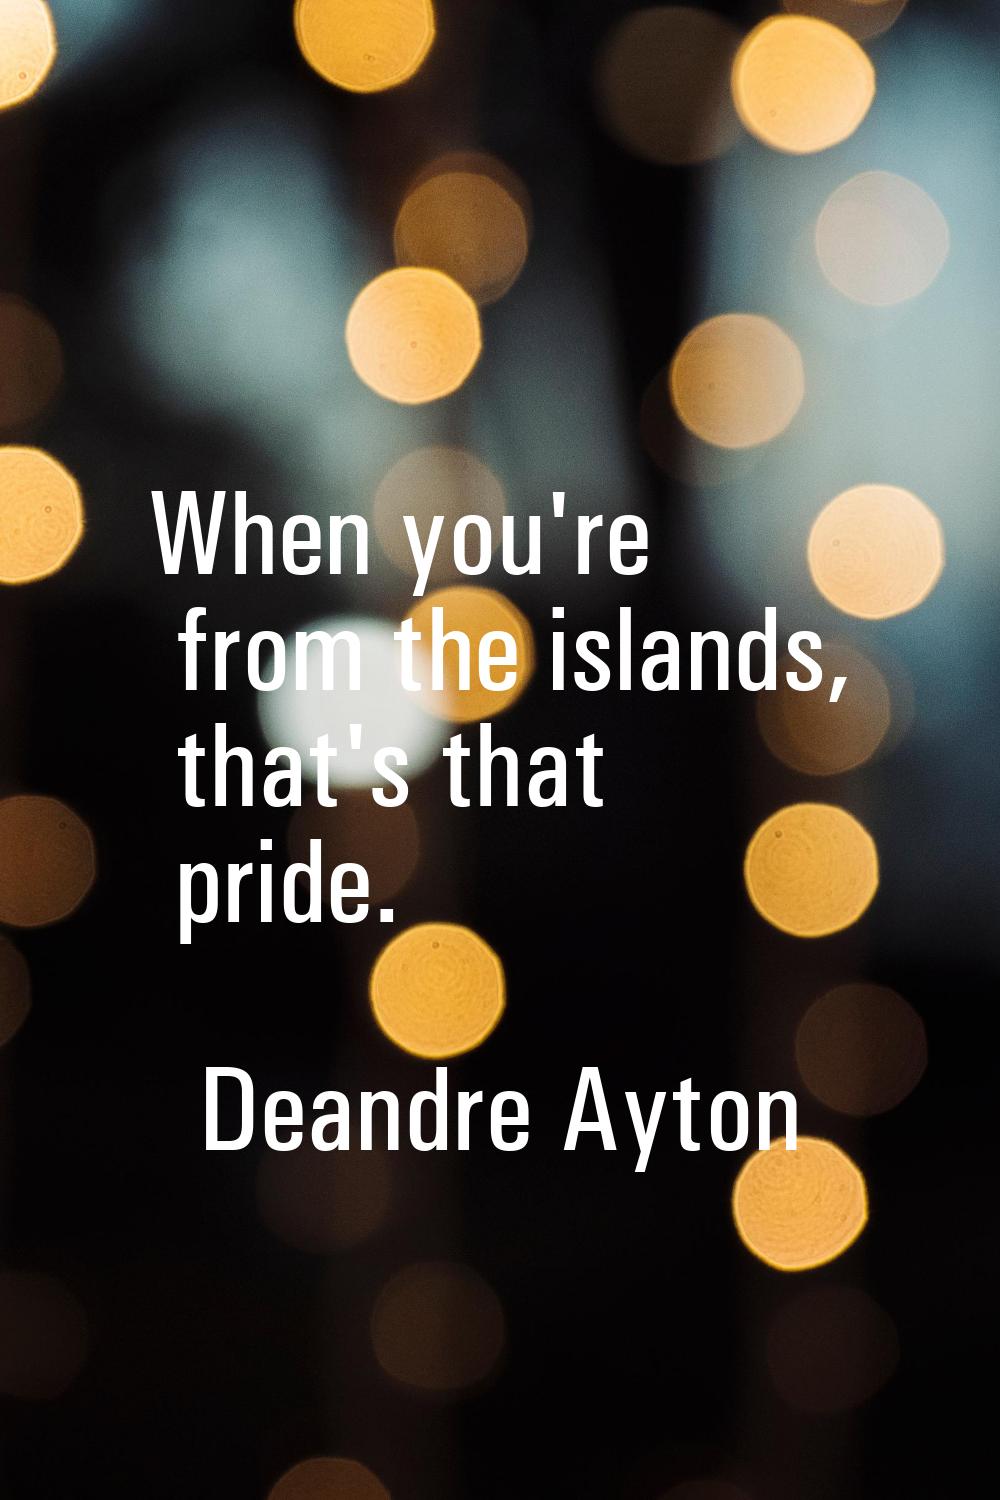 When you're from the islands, that's that pride.